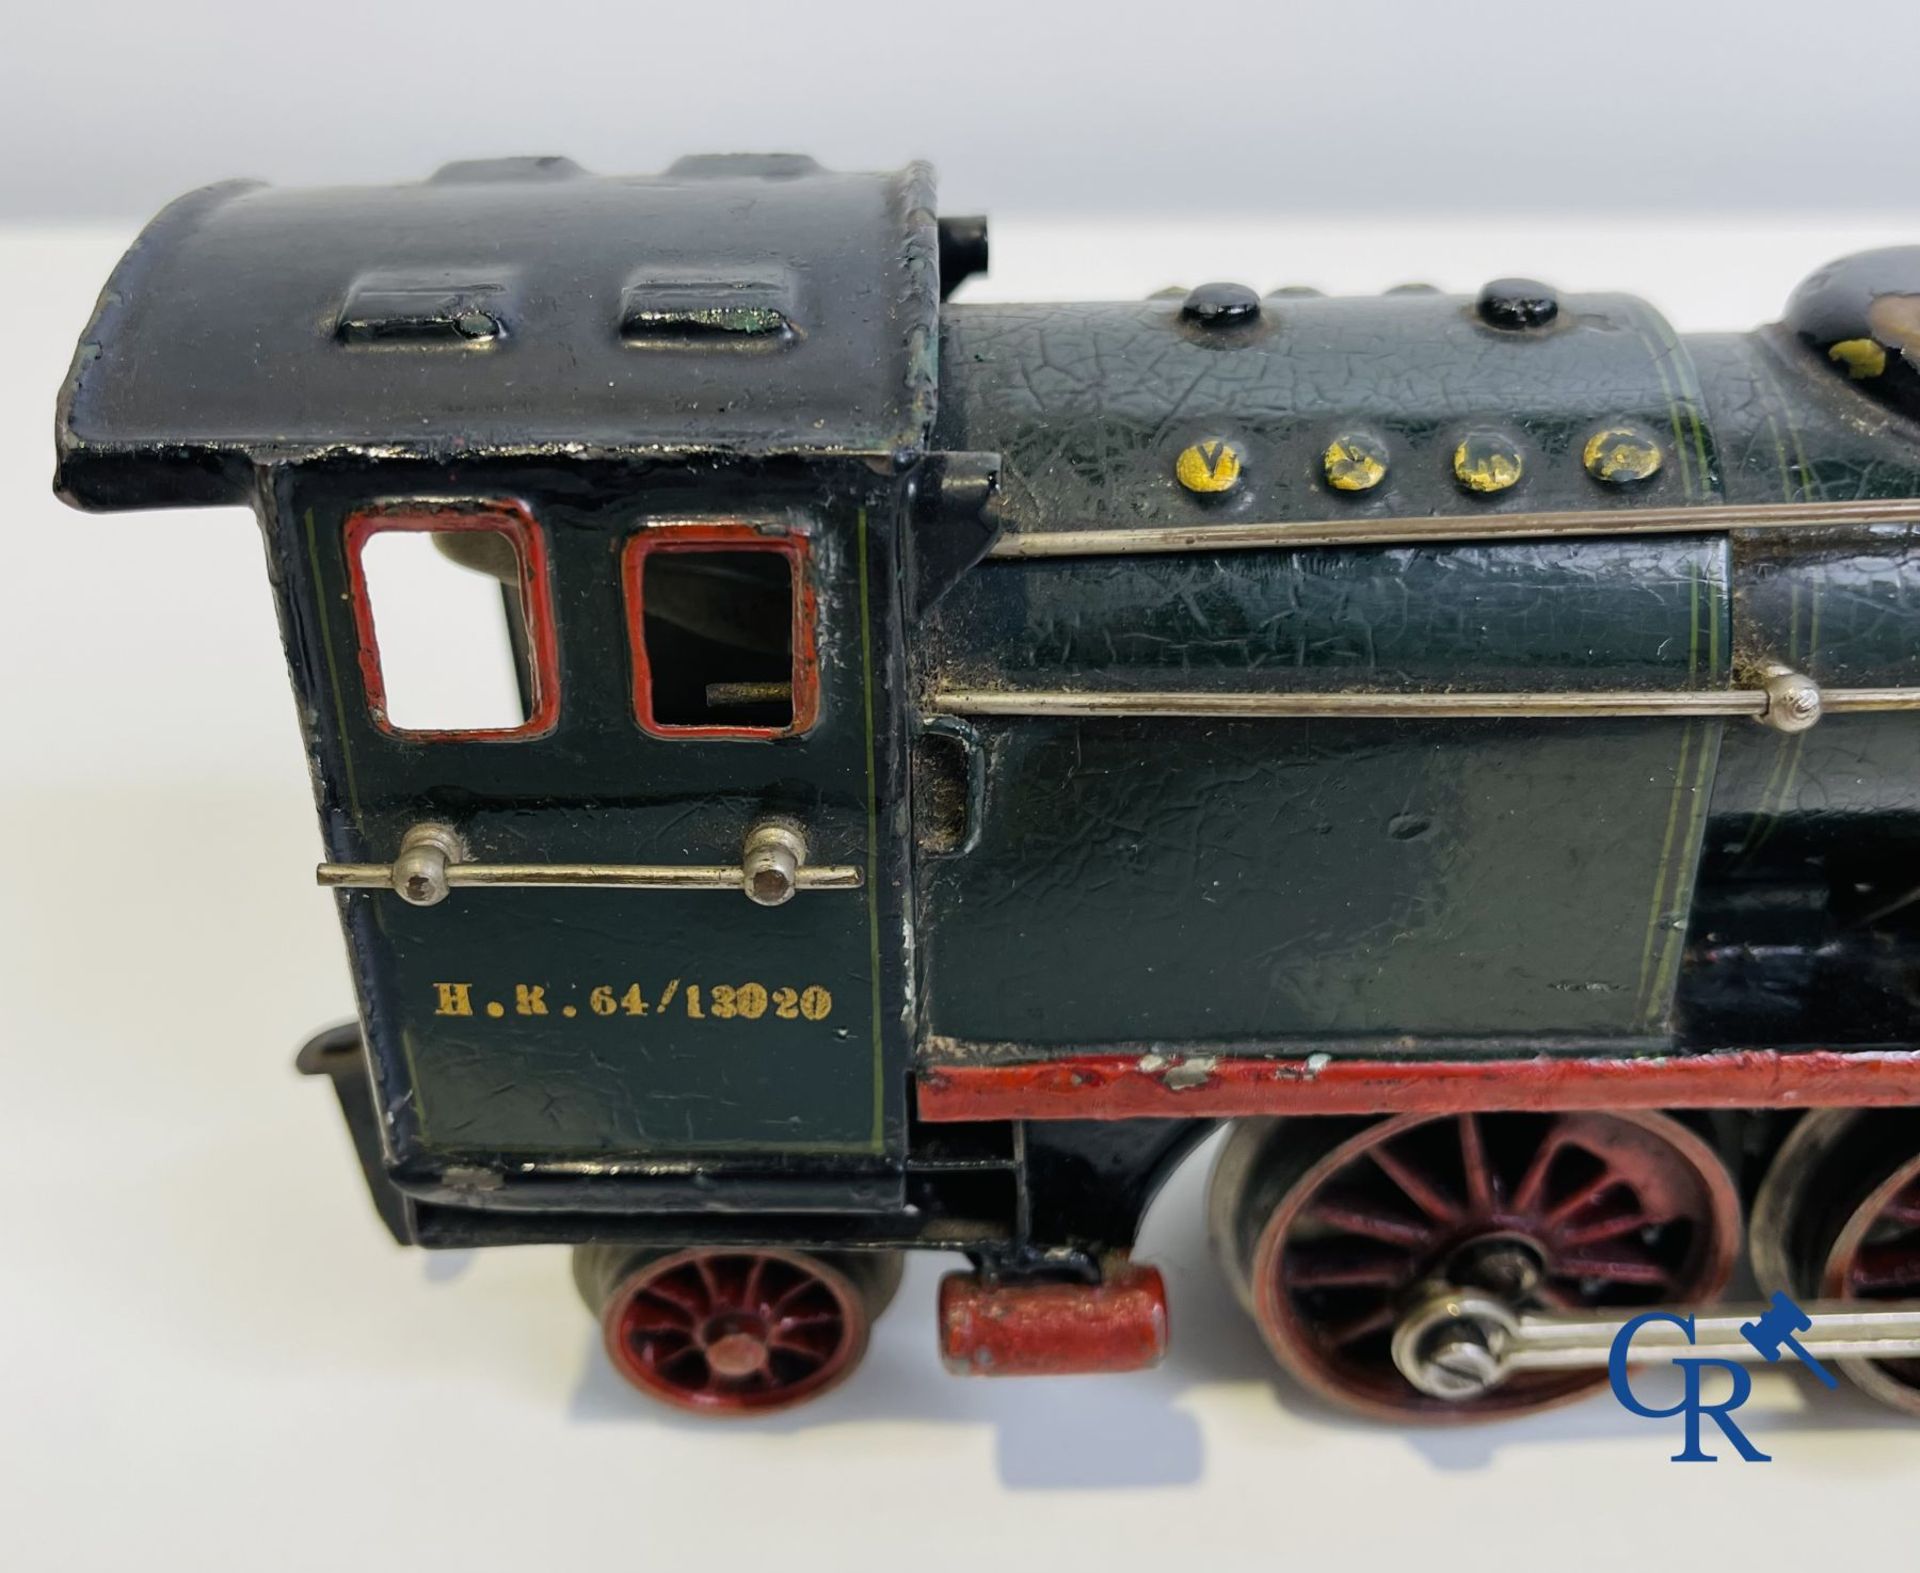 Old toys: Märklin, Locomotive with towing tender and dining car.
About 1930. - Image 7 of 32